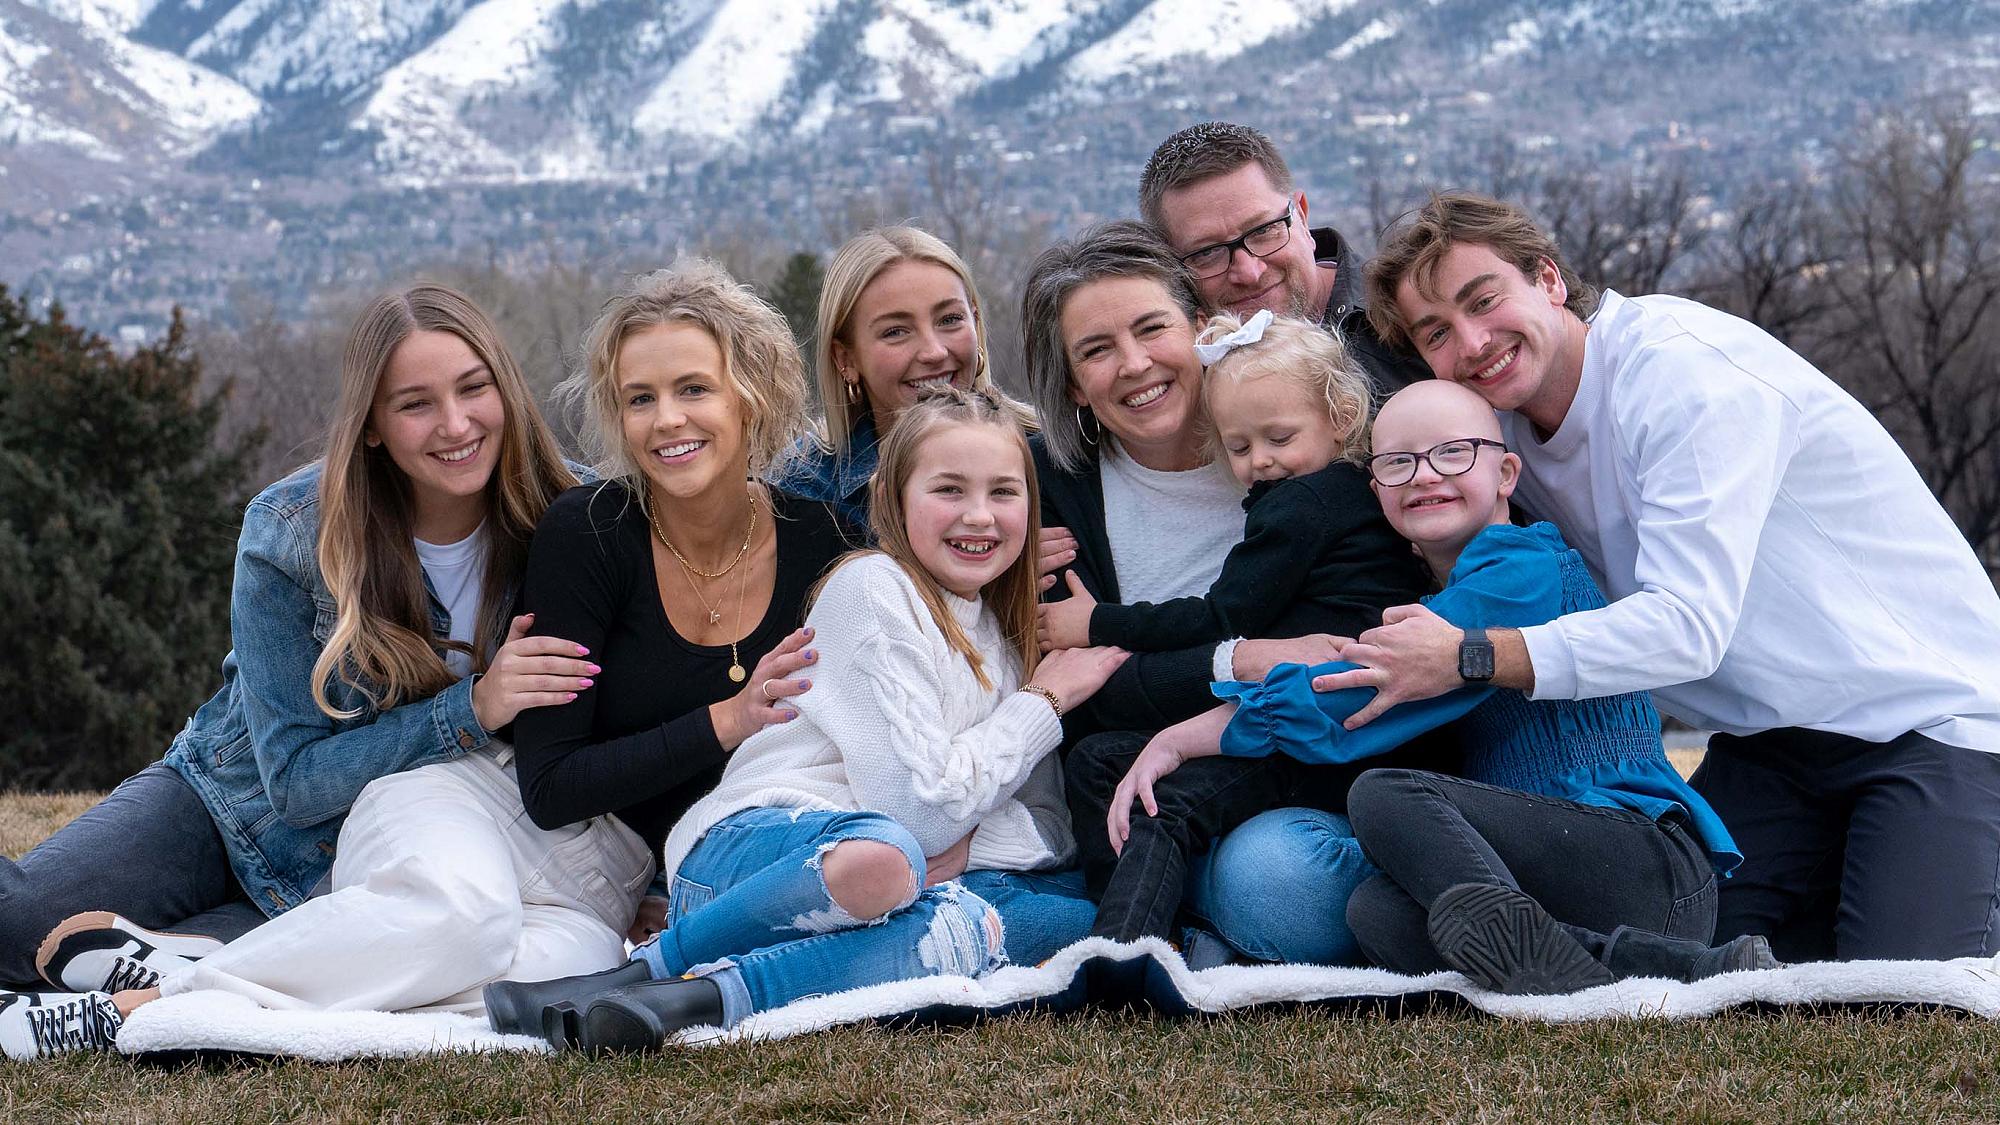 Stacie and her family of nine sit on a blanket outside and pose in a group hug